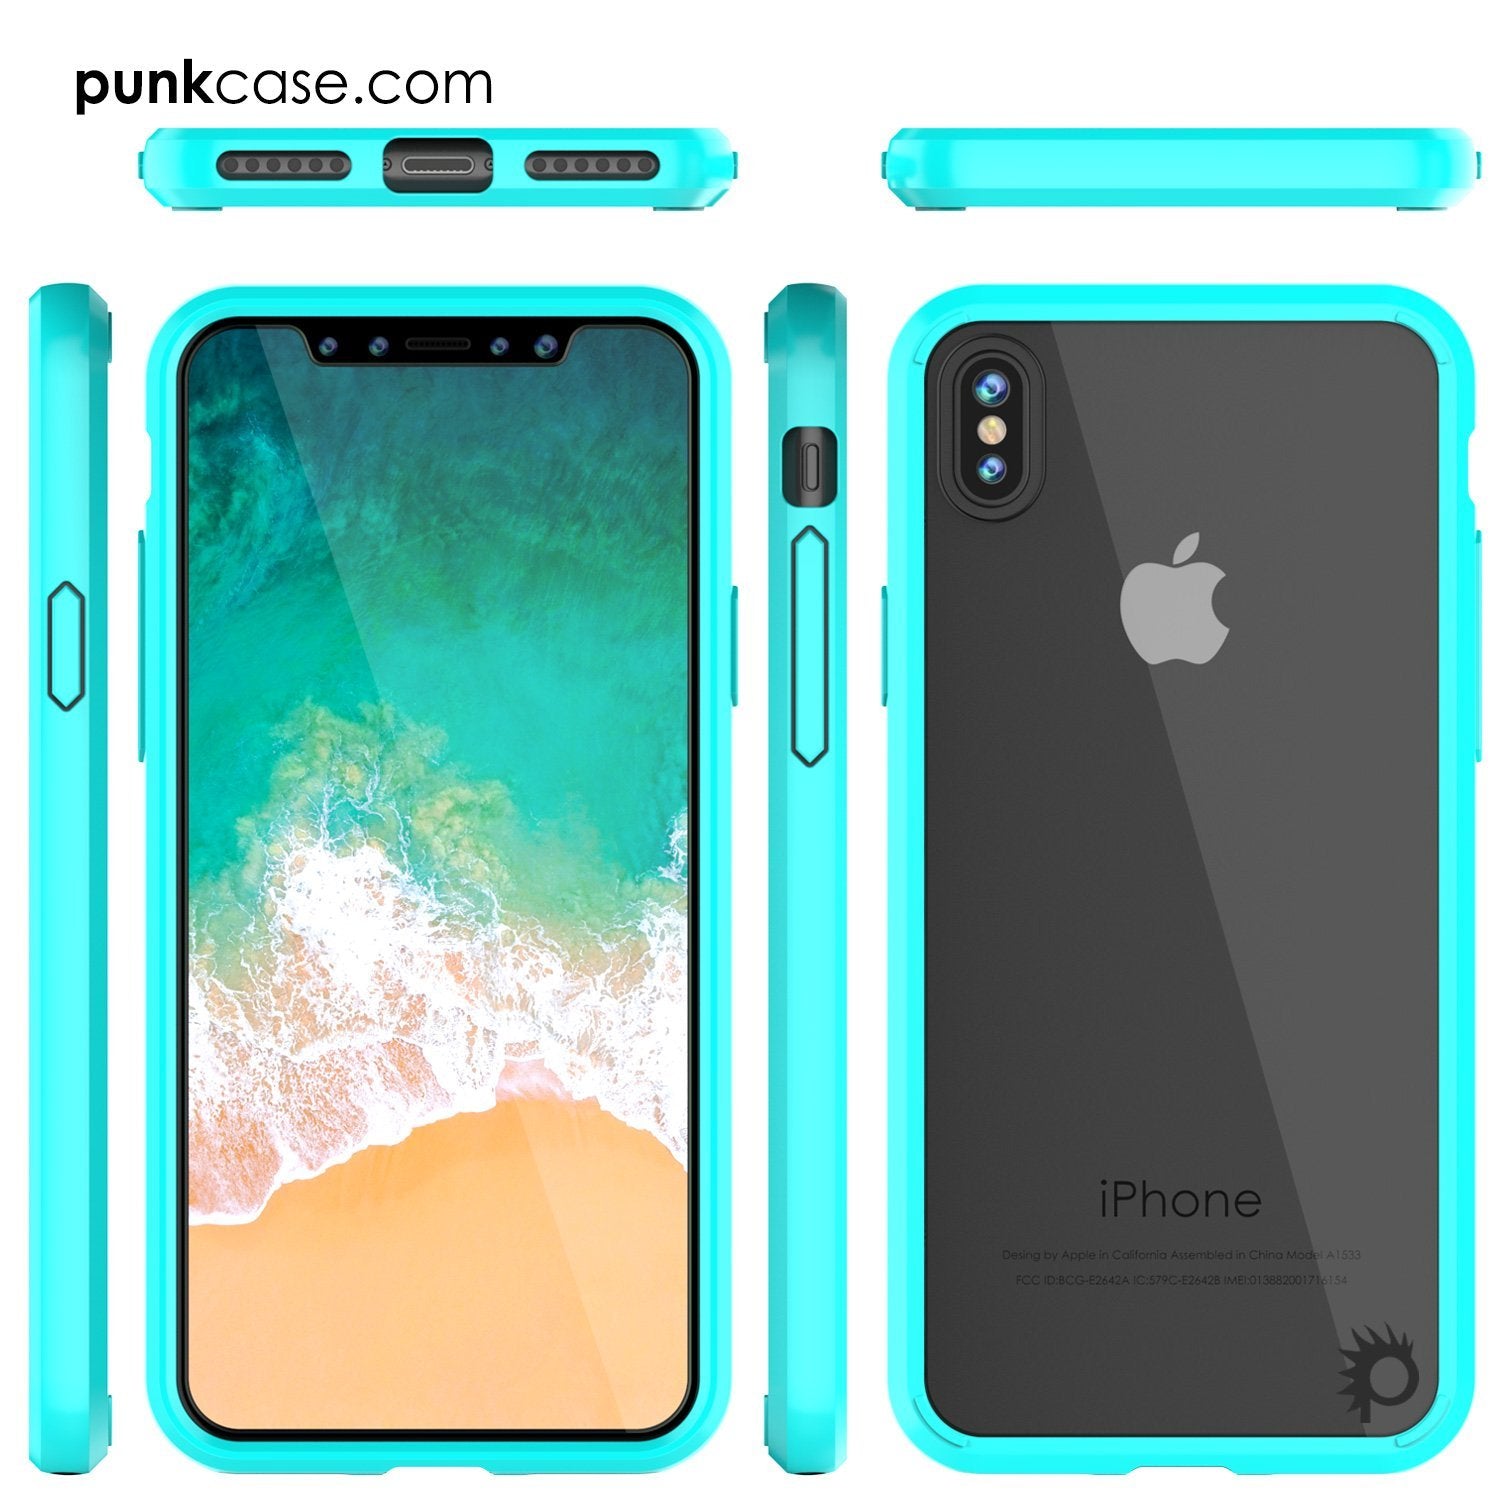 iPhone X Case, PUNKcase [LUCID 2.0 Series] [Slim Fit] Armor Cover W/Integrated Anti-Shock System & Tempered Glass PUNKSHIELD Screen Protector [Teal]